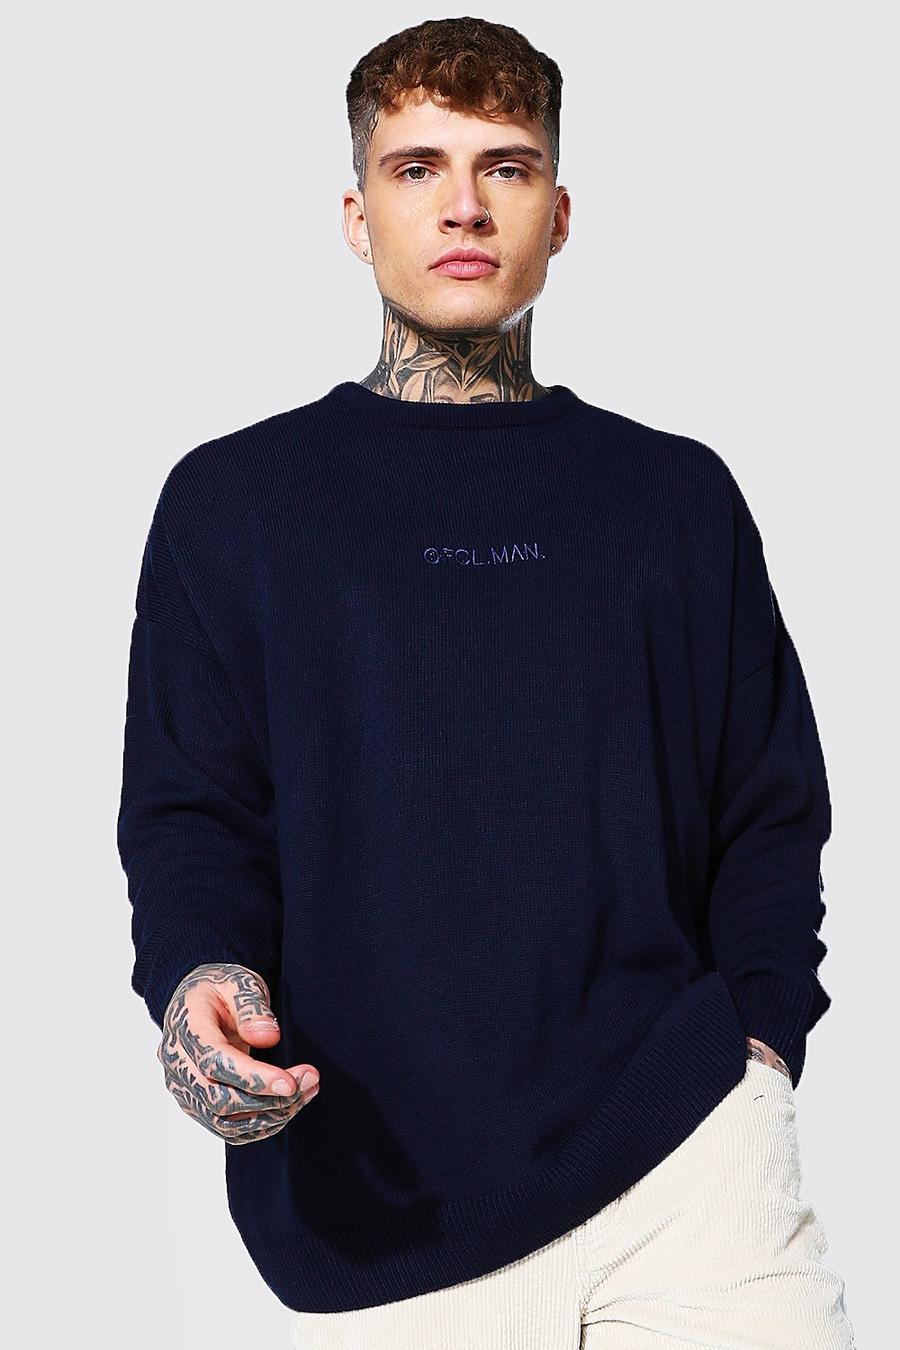 Navy Oversized Ofcl Man Tonal Embroidered Sweater image number 1